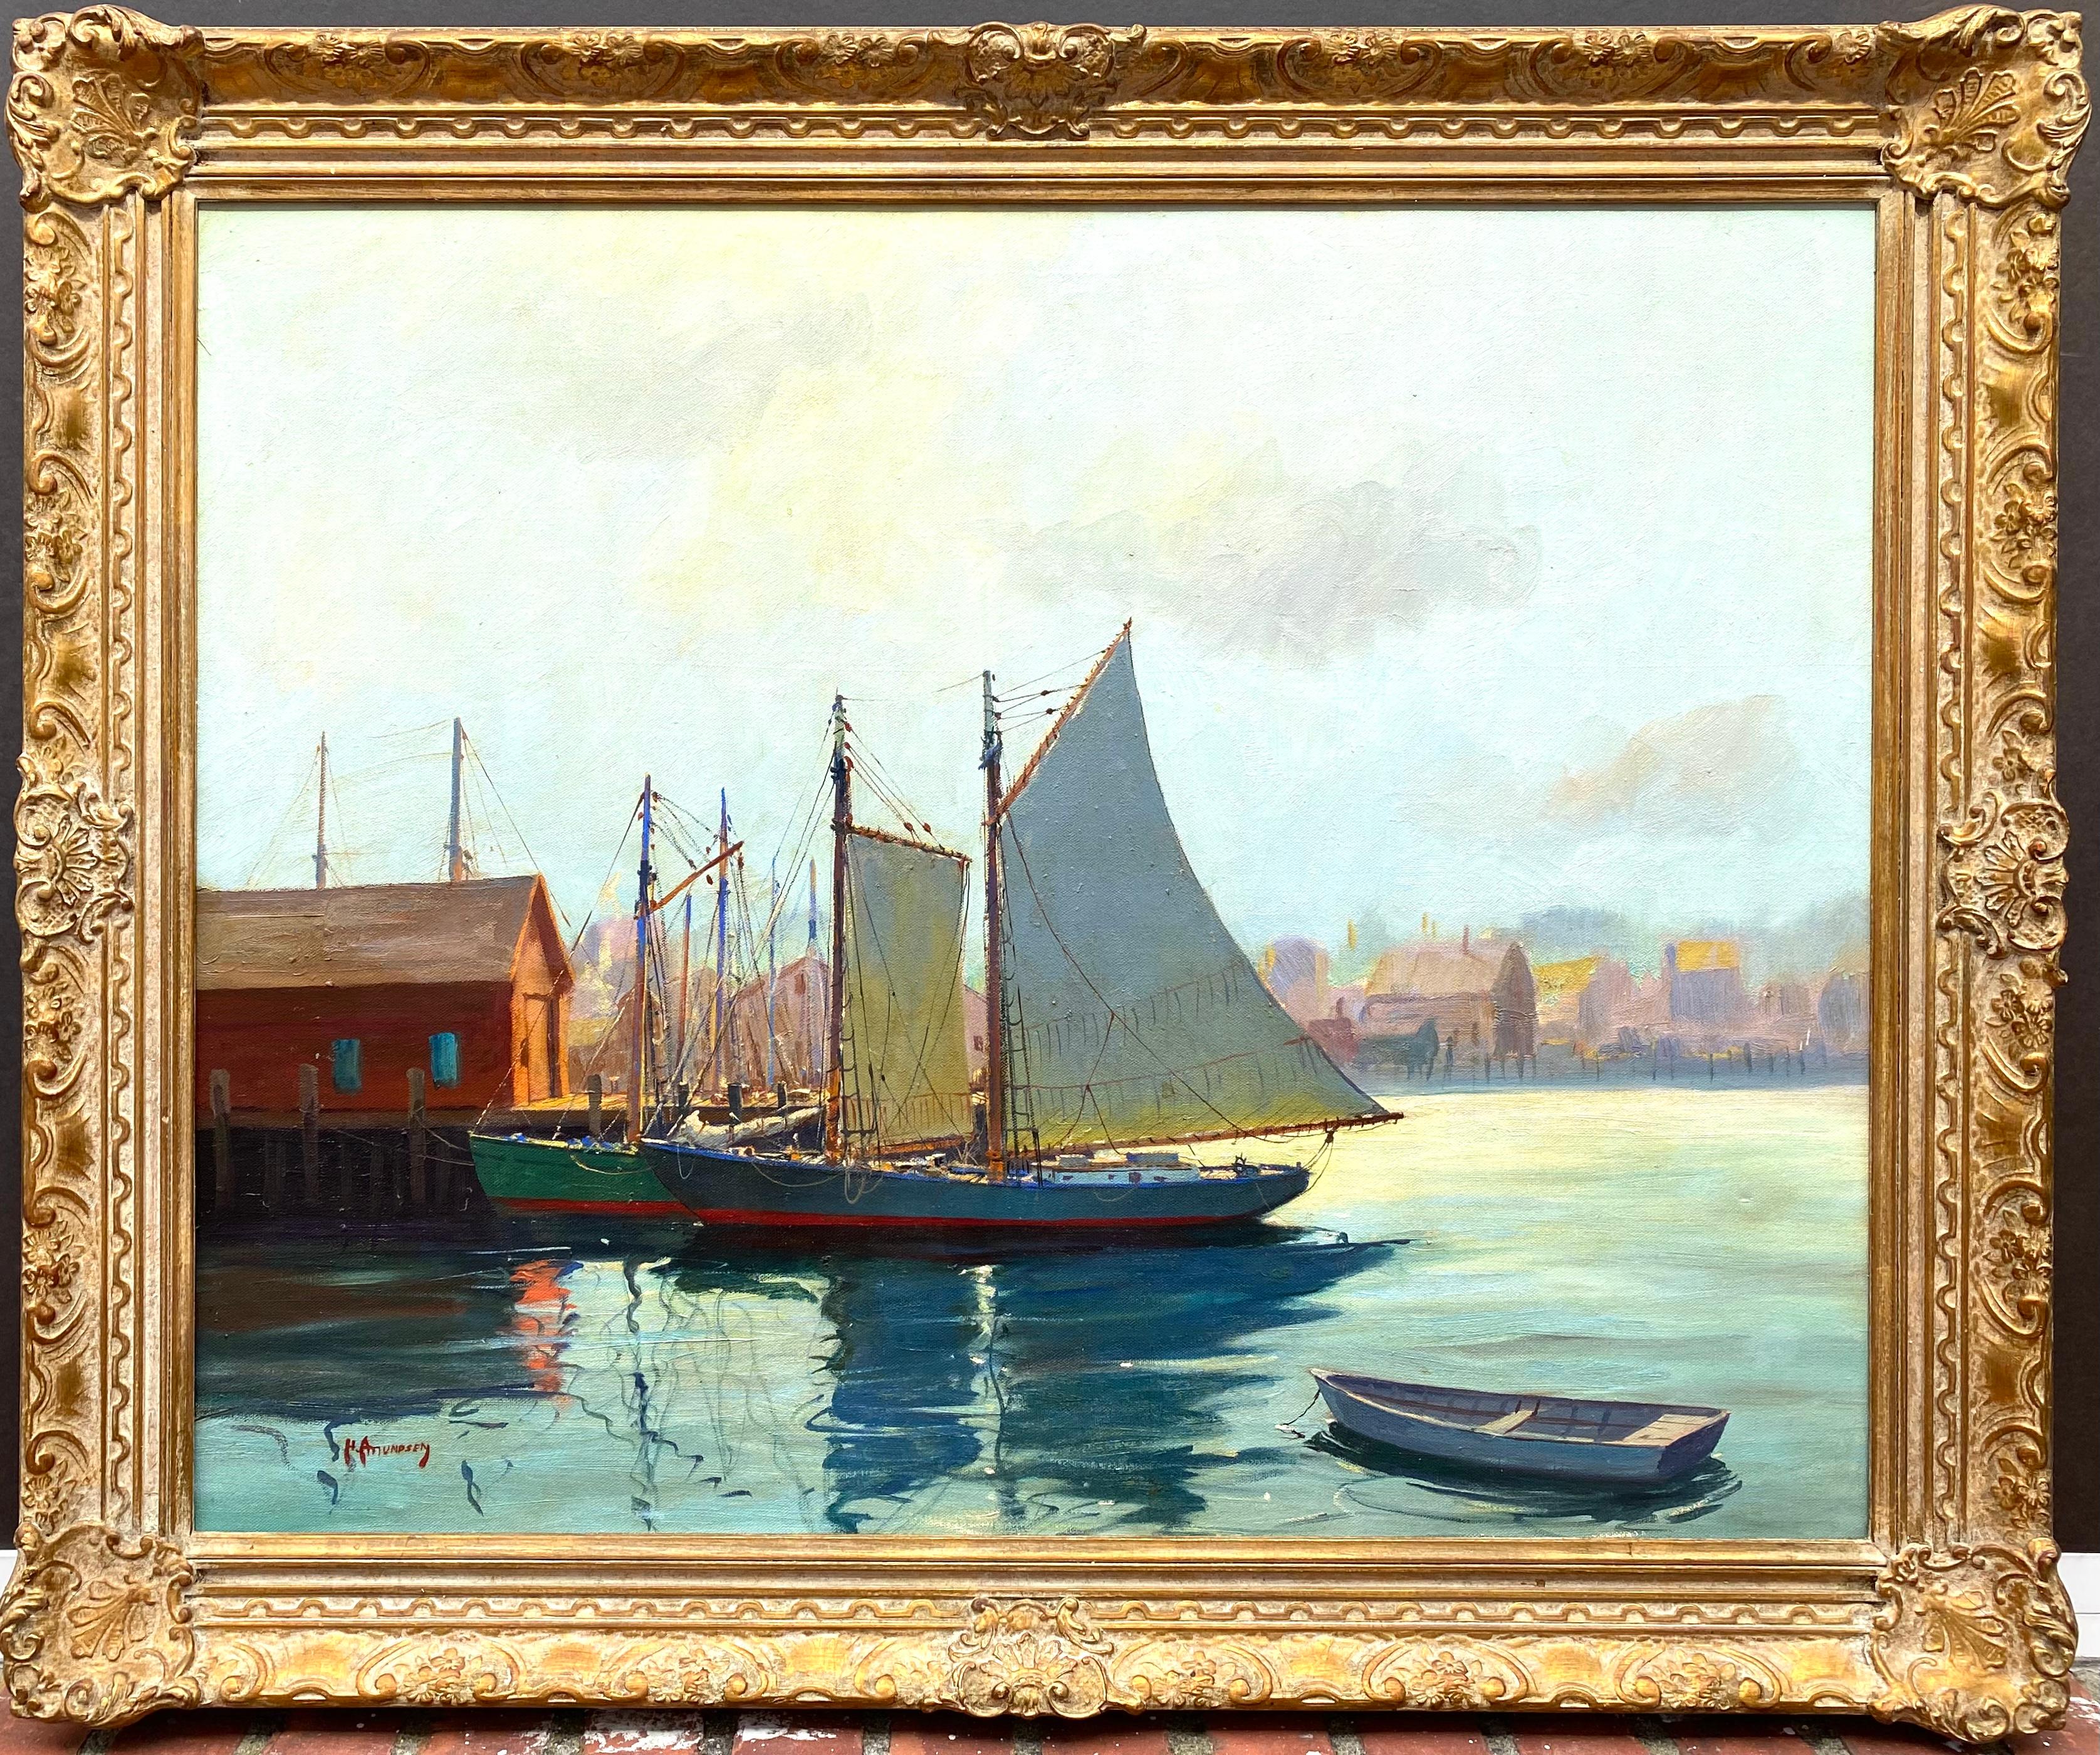 Beautiful original oil on canvas painting of Gloucester Harbor at the end of the day by the well known American marine artist, Hjalmar (Cappy) Amundsen.  Signed H. Amundsen lower left. The painting has been recently professionally cleaned and is in